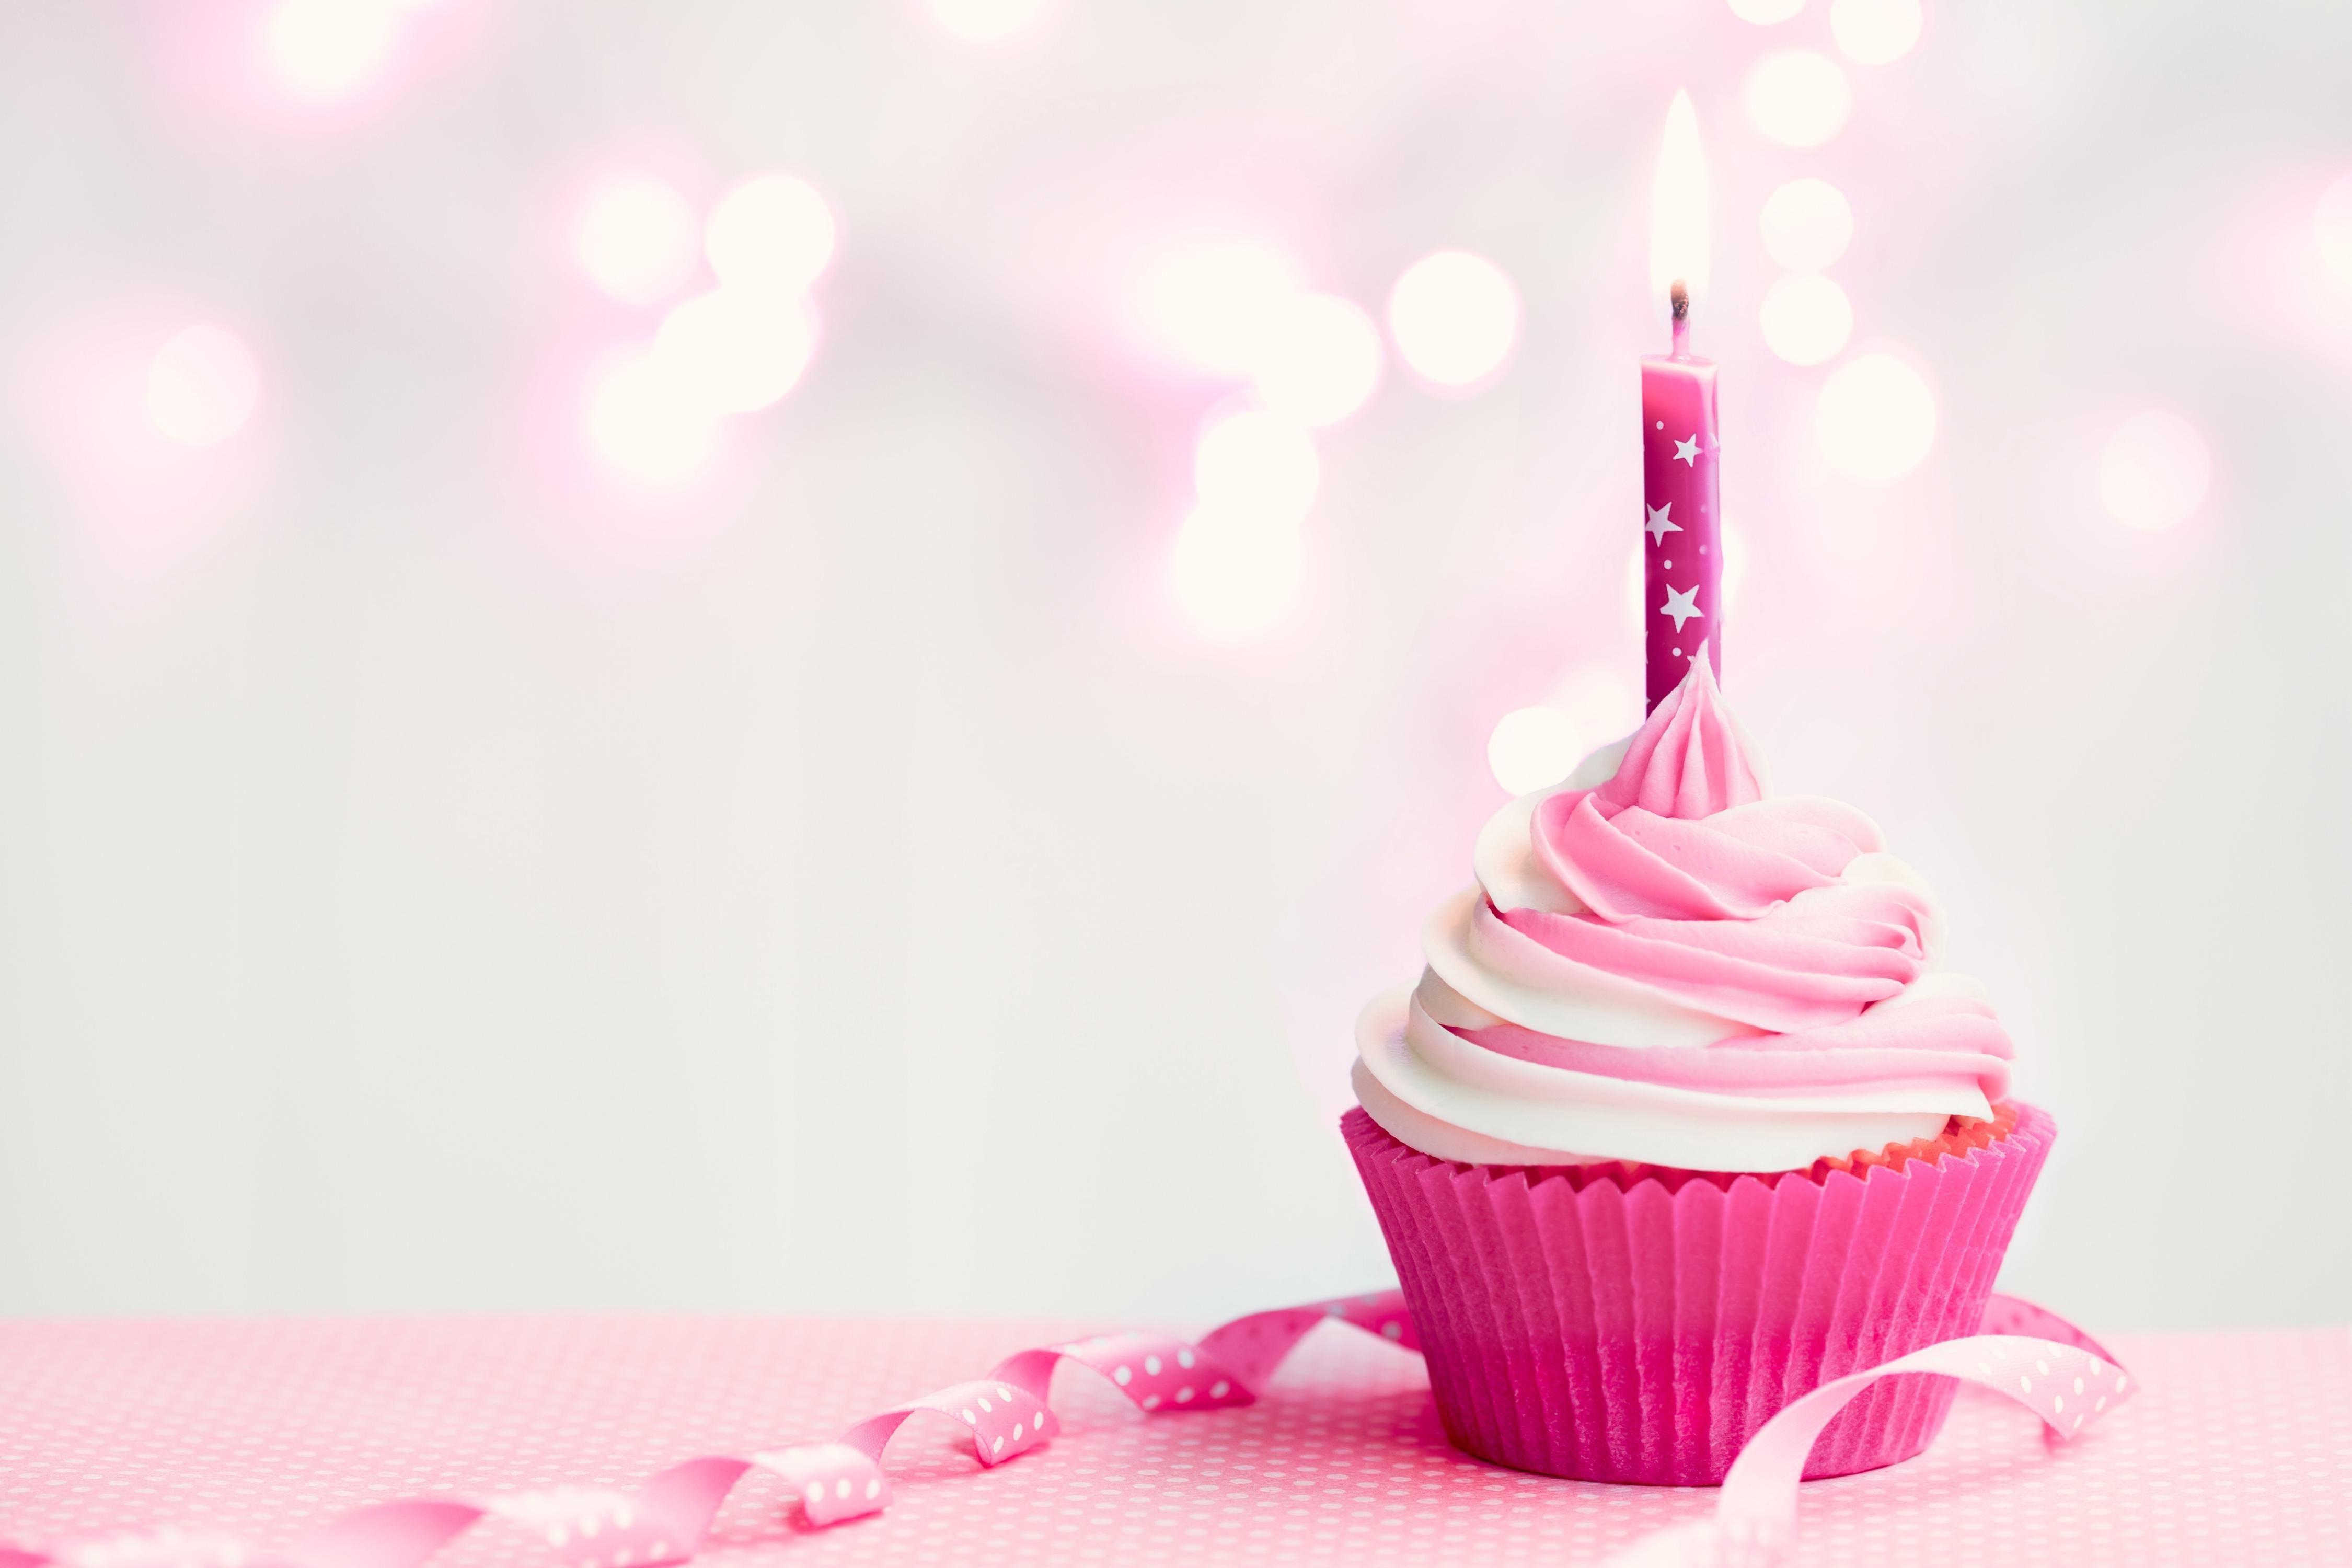 A cupcake with candle and pink ribbon - Cupcakes